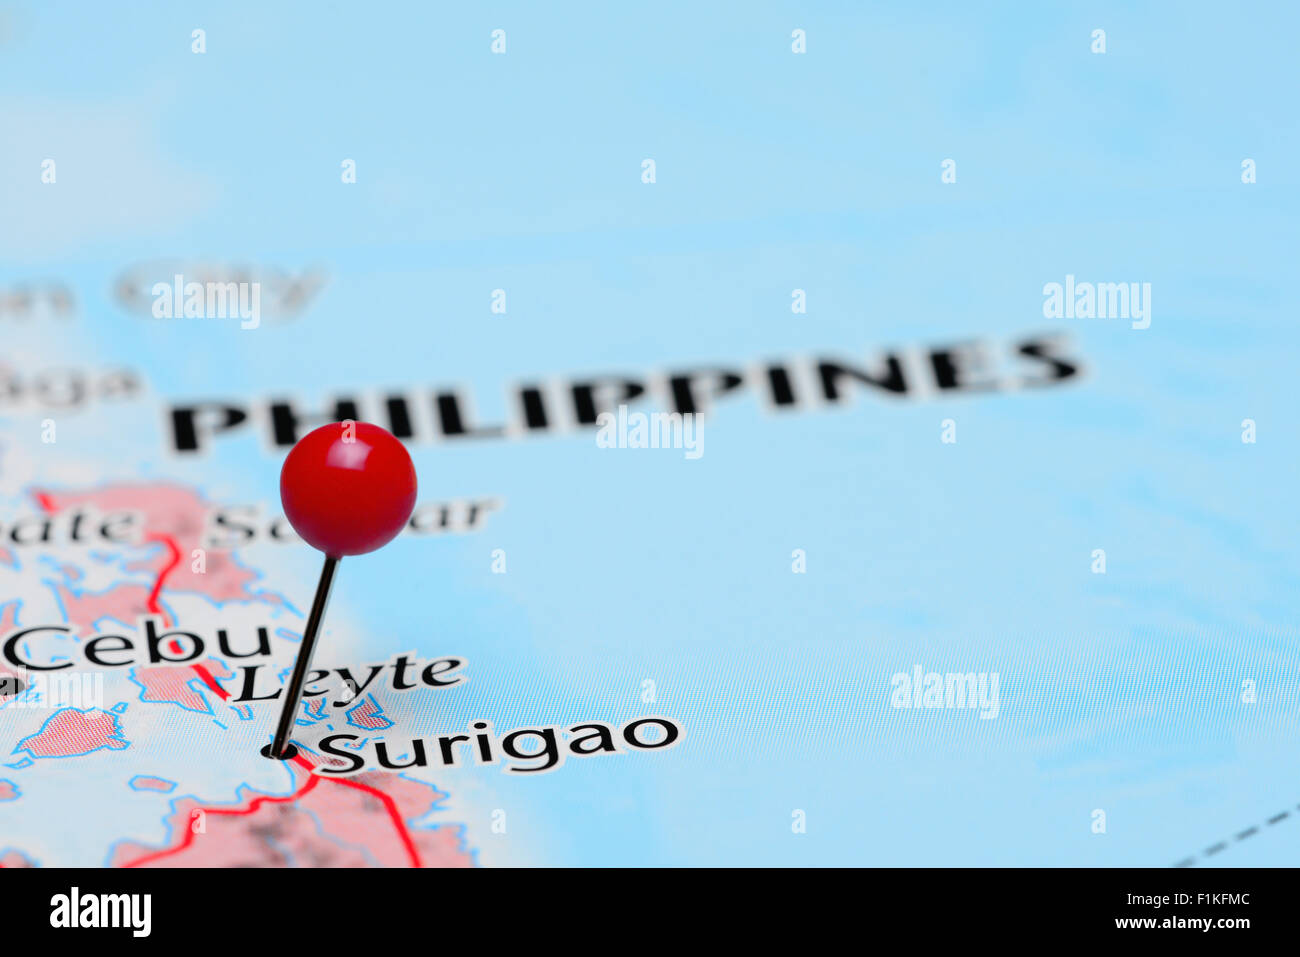 Surigao pinned on a map of Asia Stock Photo